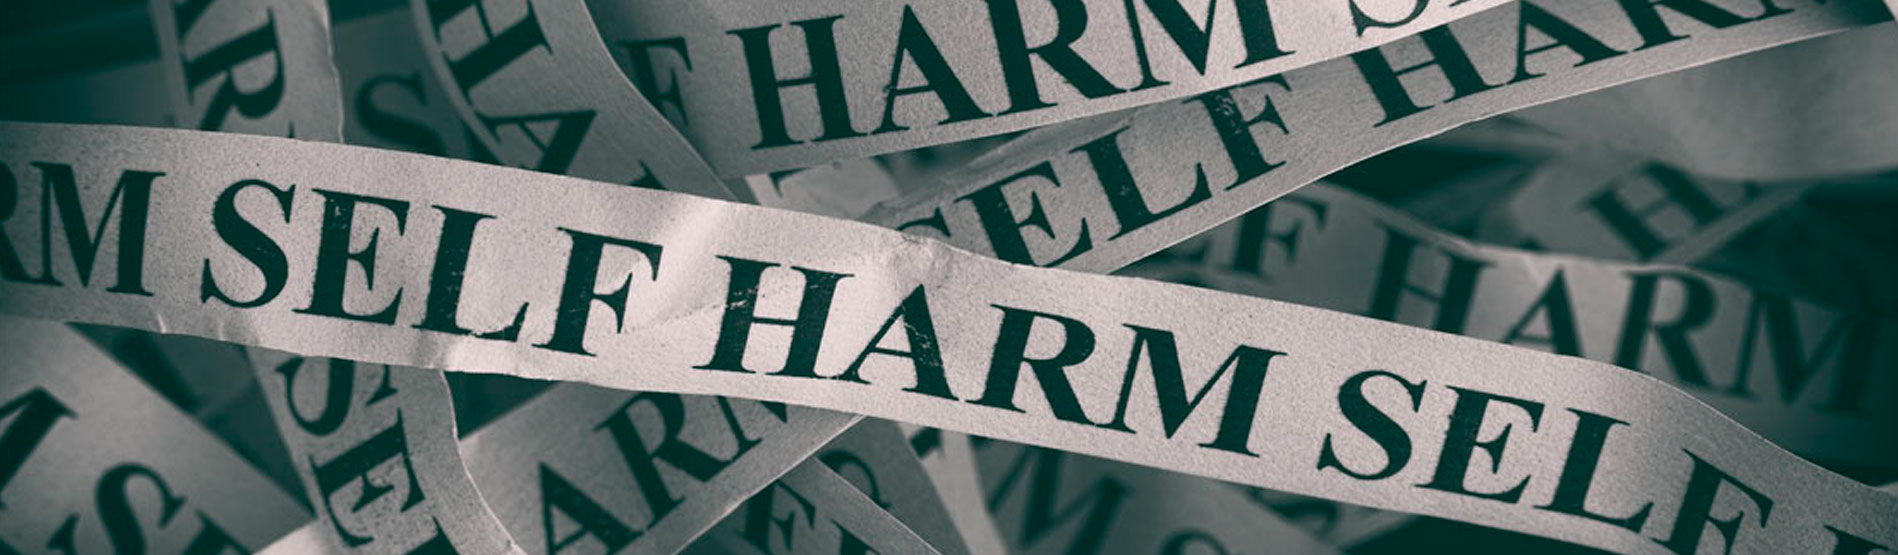 Using 'Big Data' to reduce and prevent self-harm and suicide